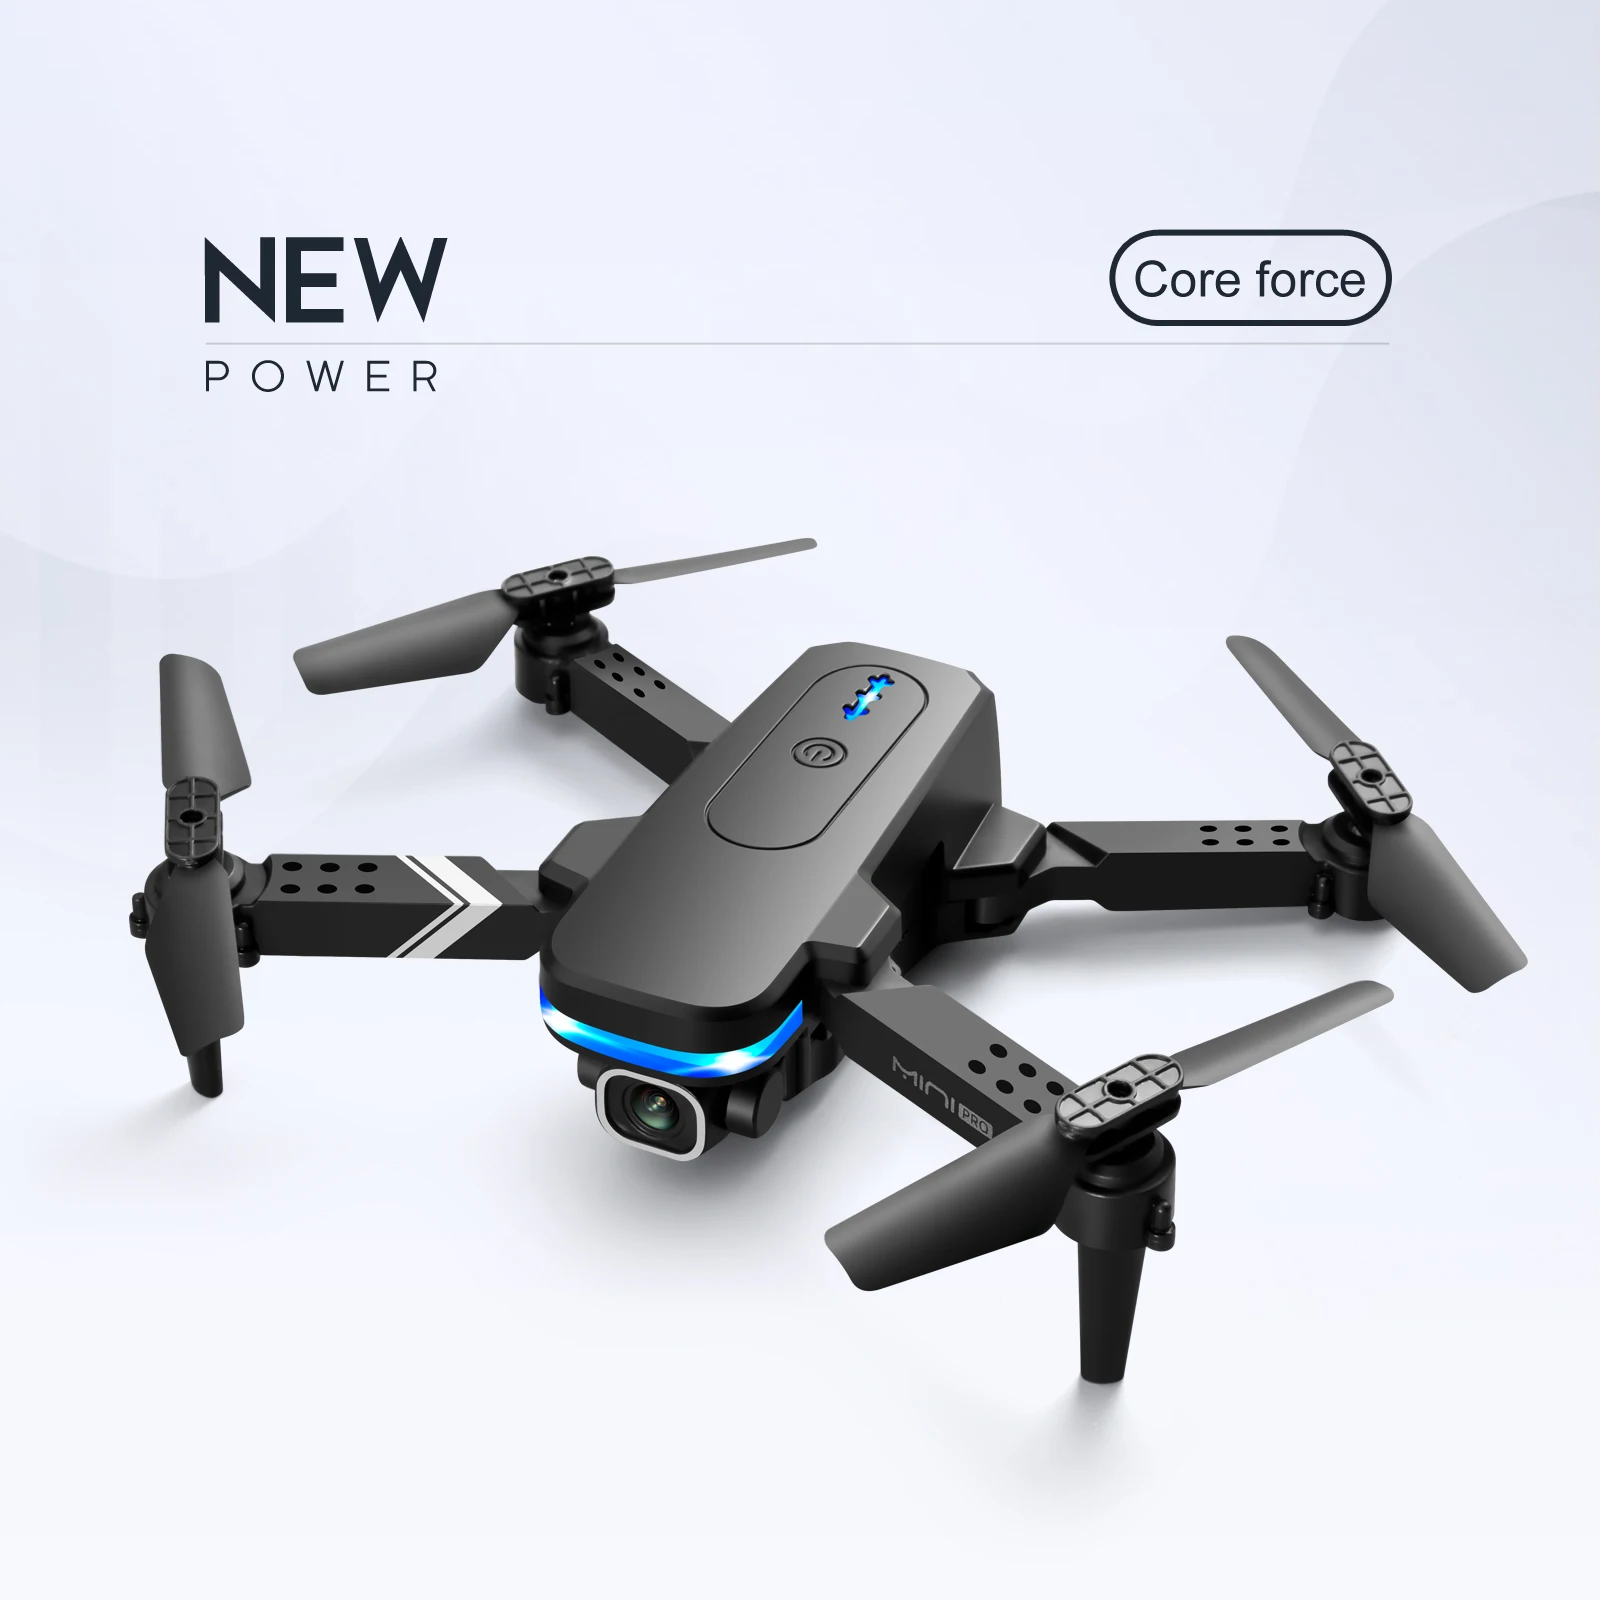 

KY910 Mini Drone 4K HD Dual Camera Gesture Photo Wifi FPV Professional Foldable Outdoor RC Drone Helicopter Quadcopter Toys